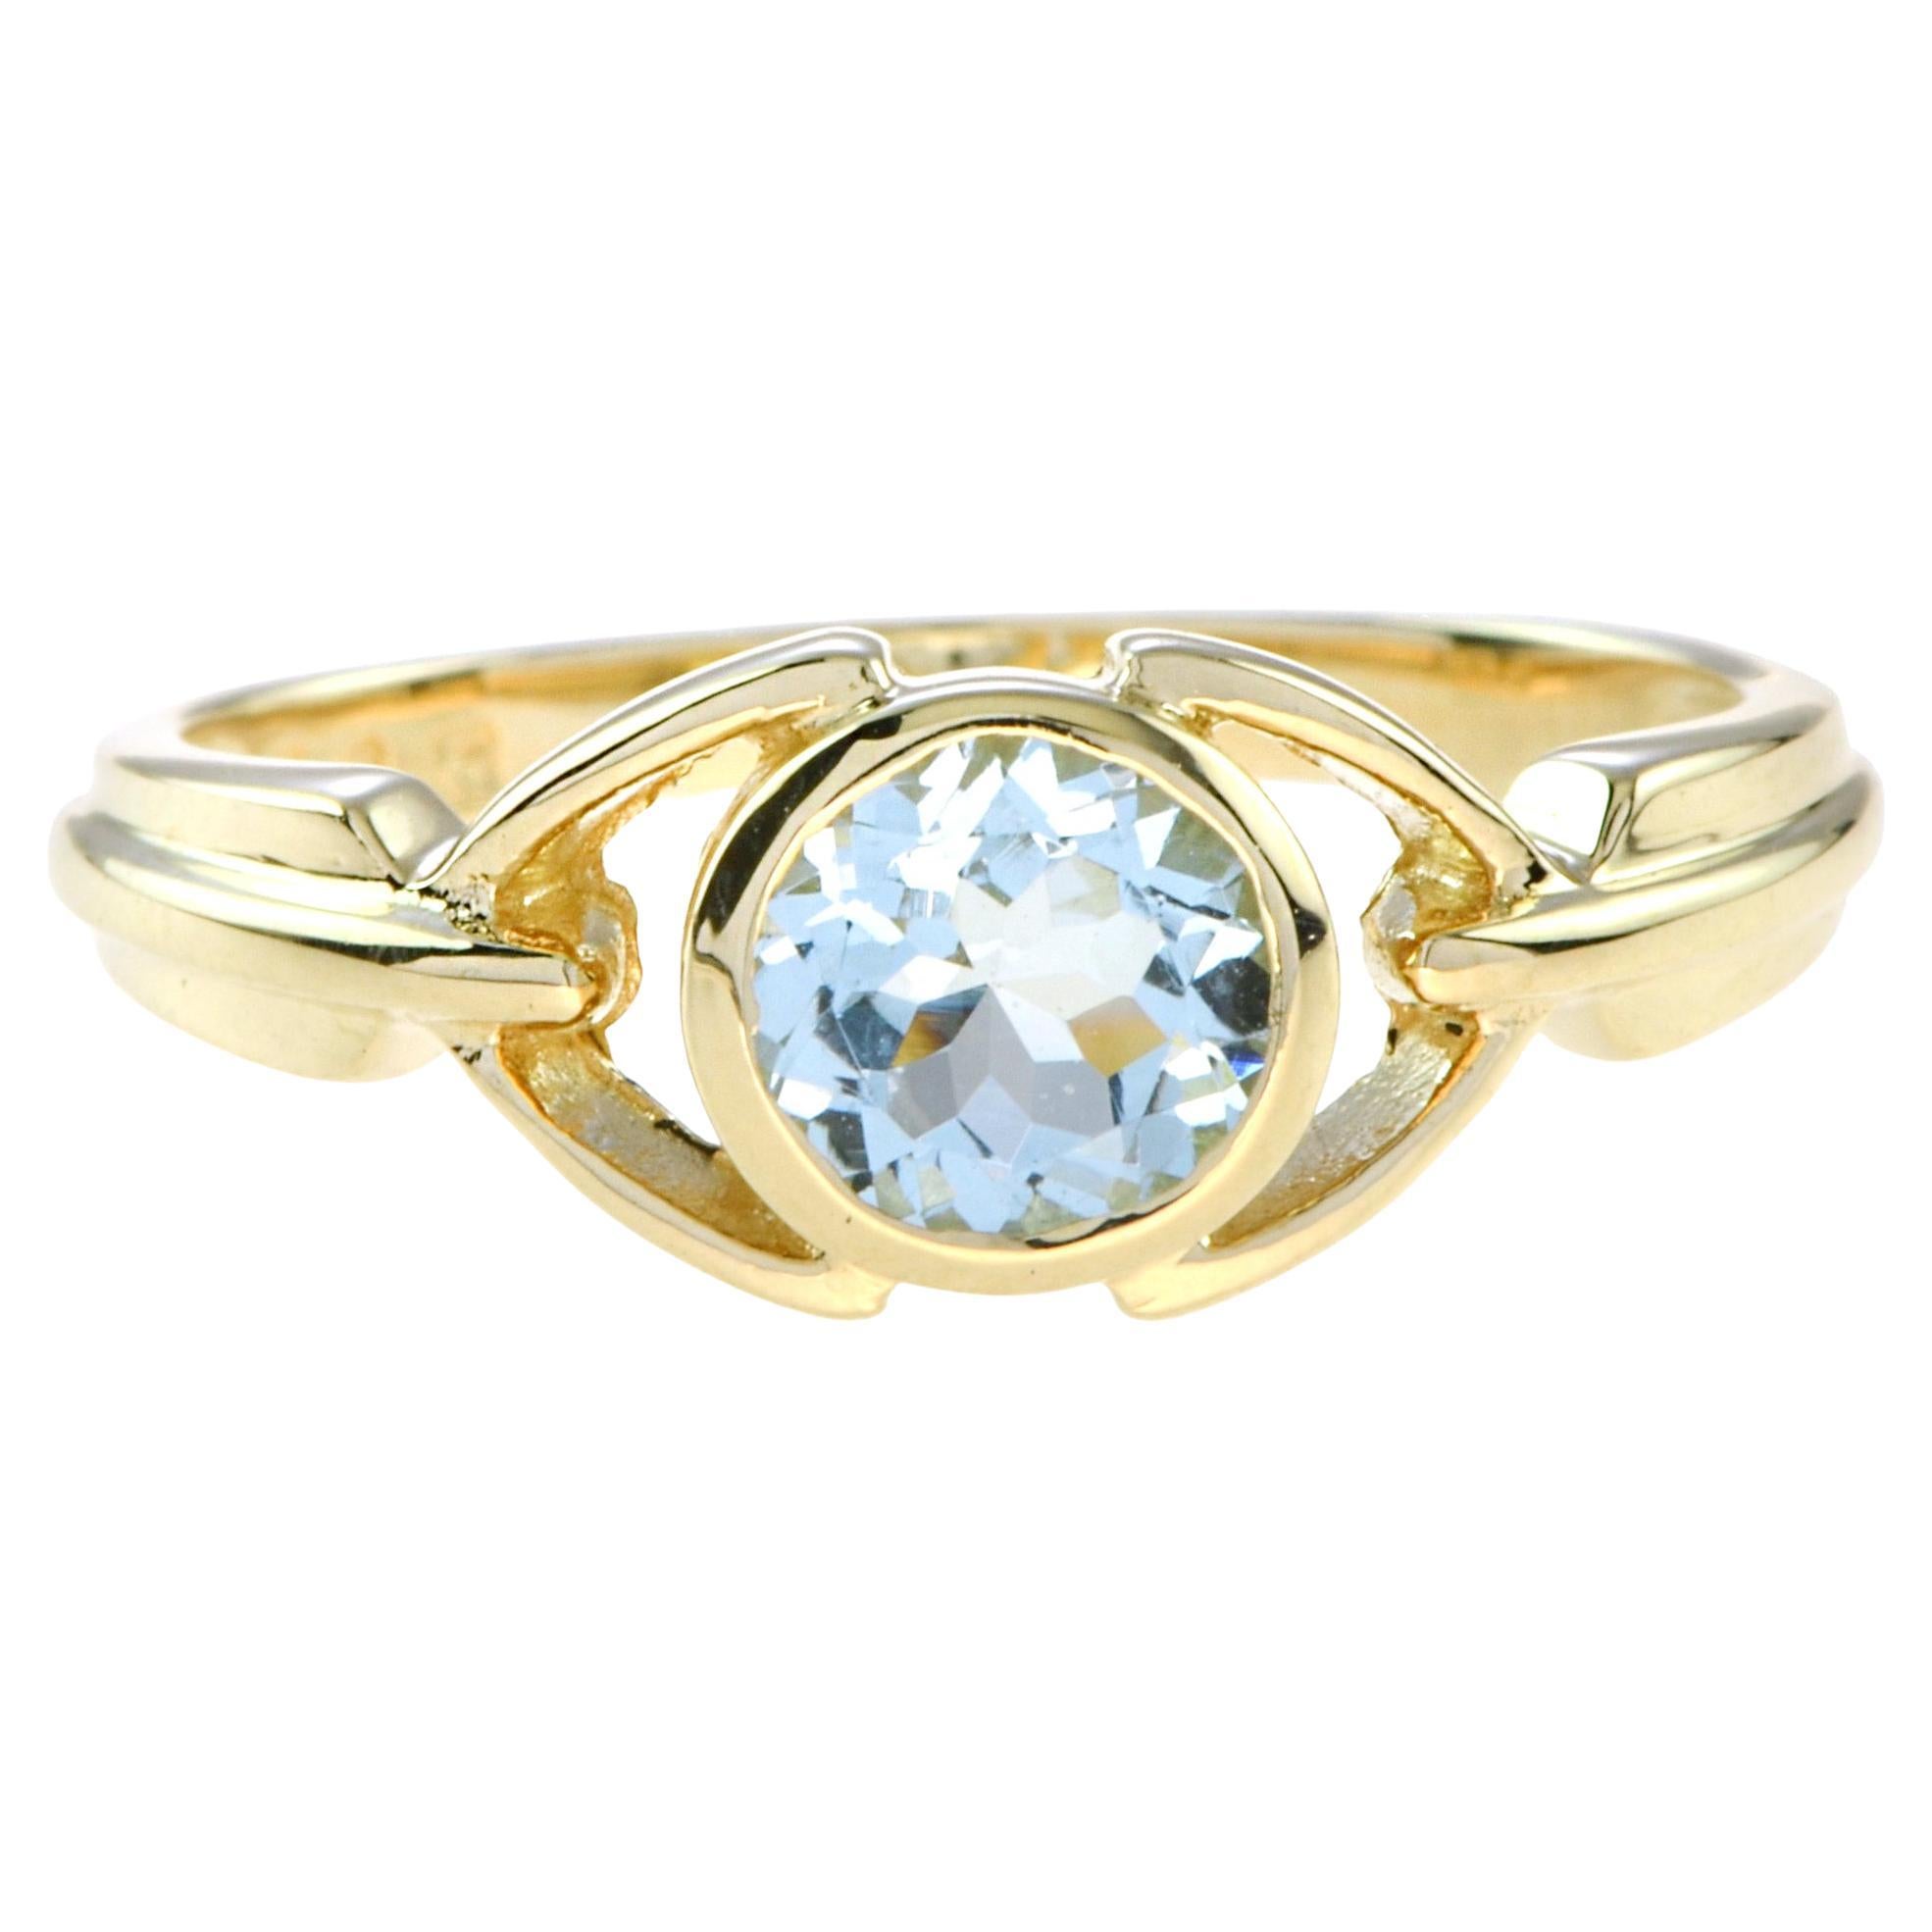 For Sale:  Vintage Style Round Aquamarine Bezel Set Ring in 14K Yellow Gold